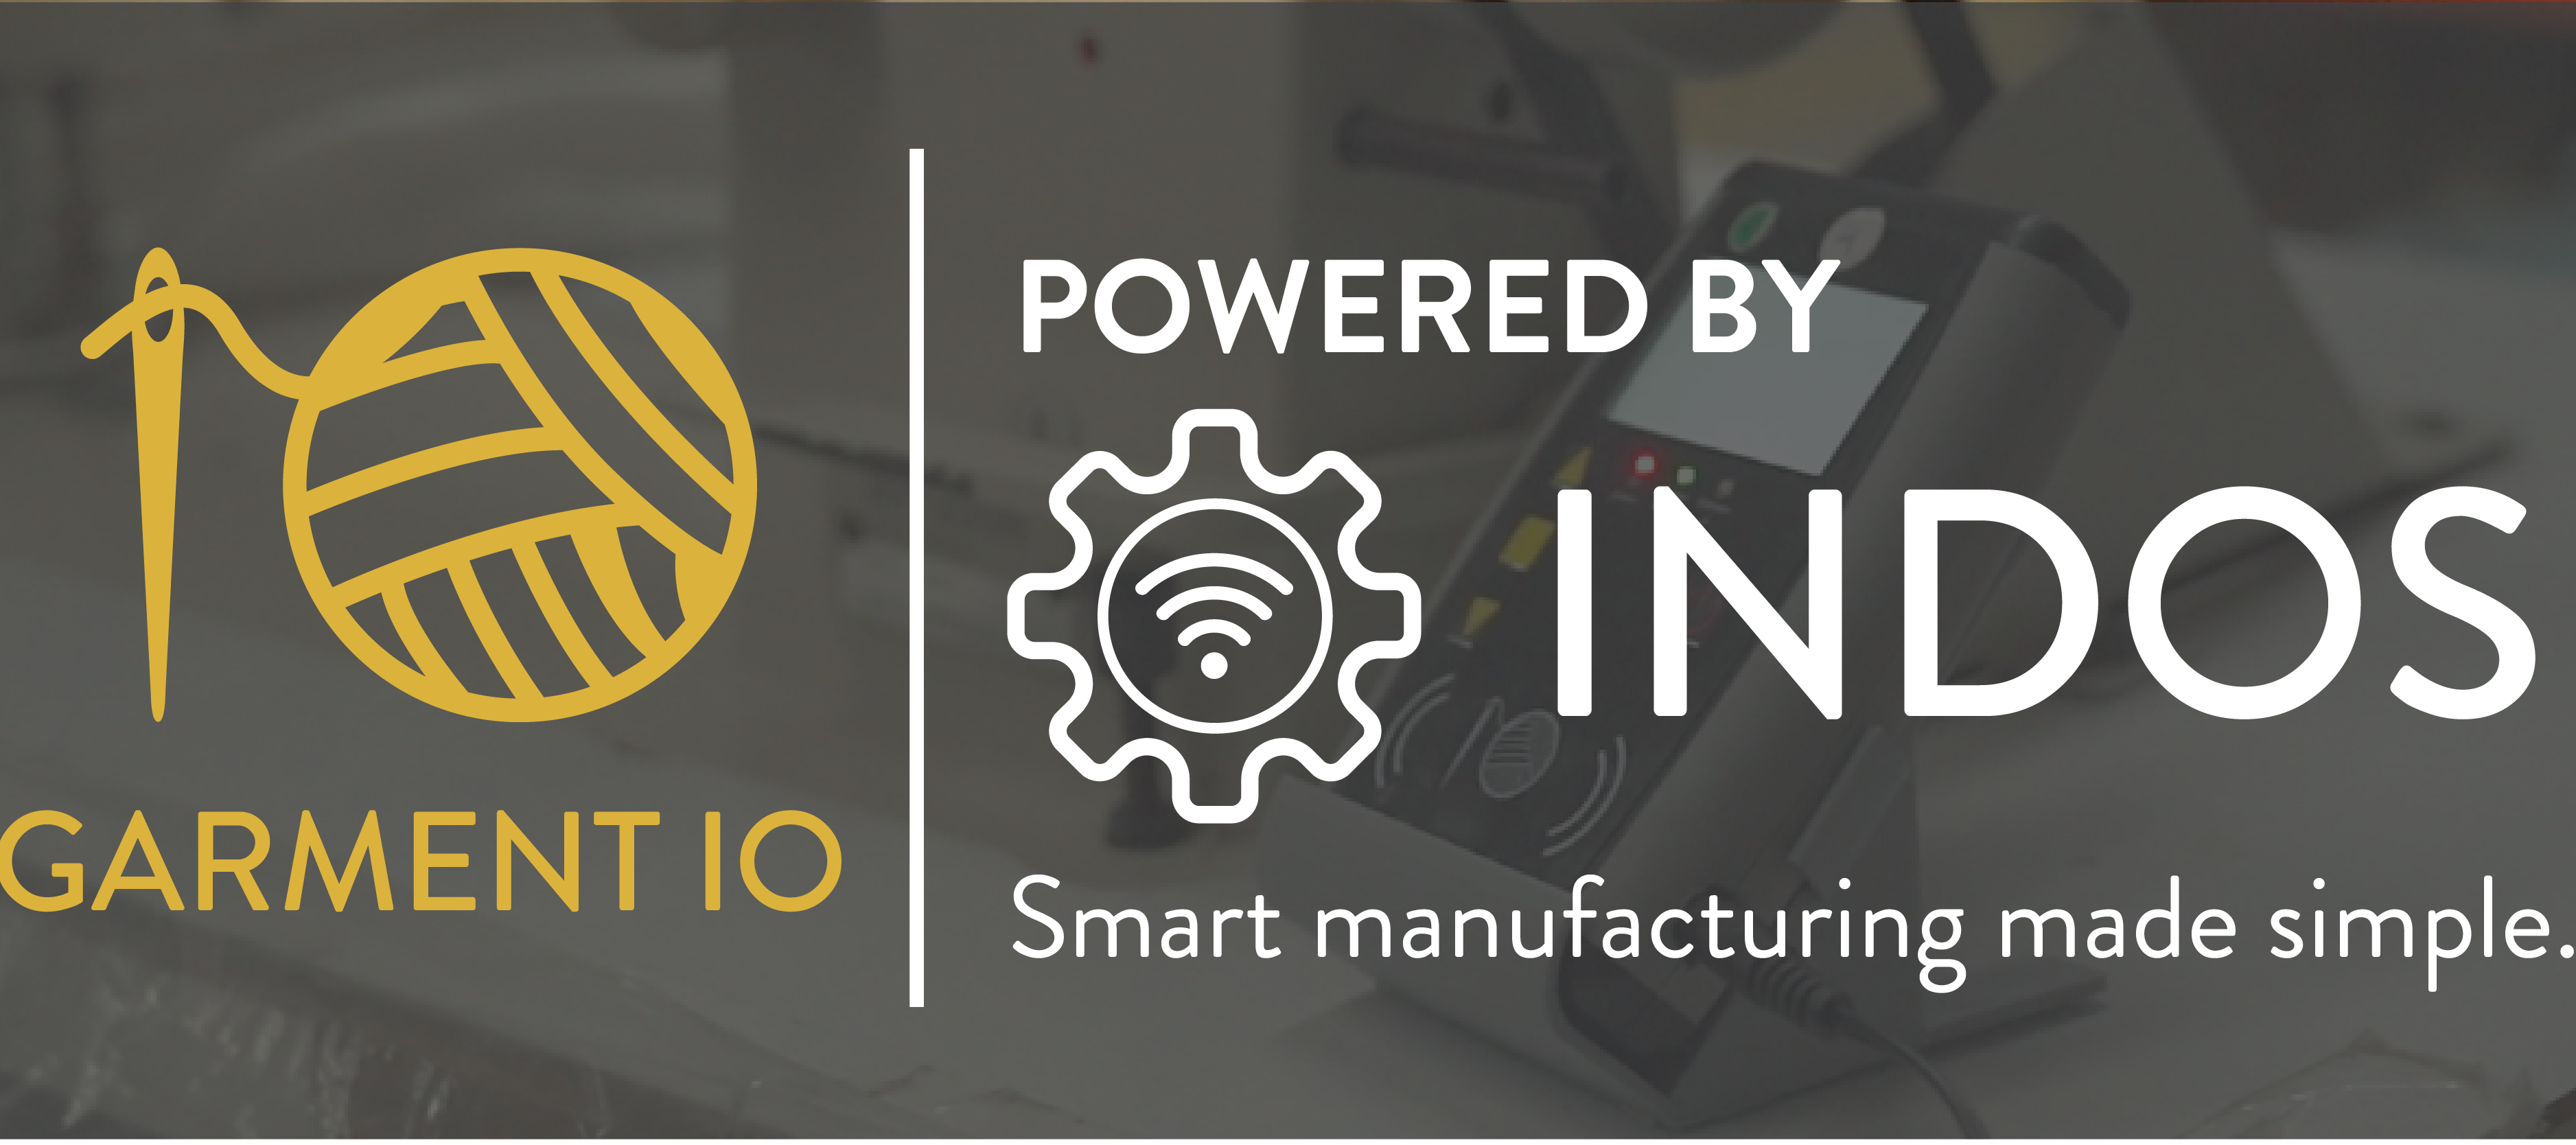 Garment IO - Powered by INDOS Corp